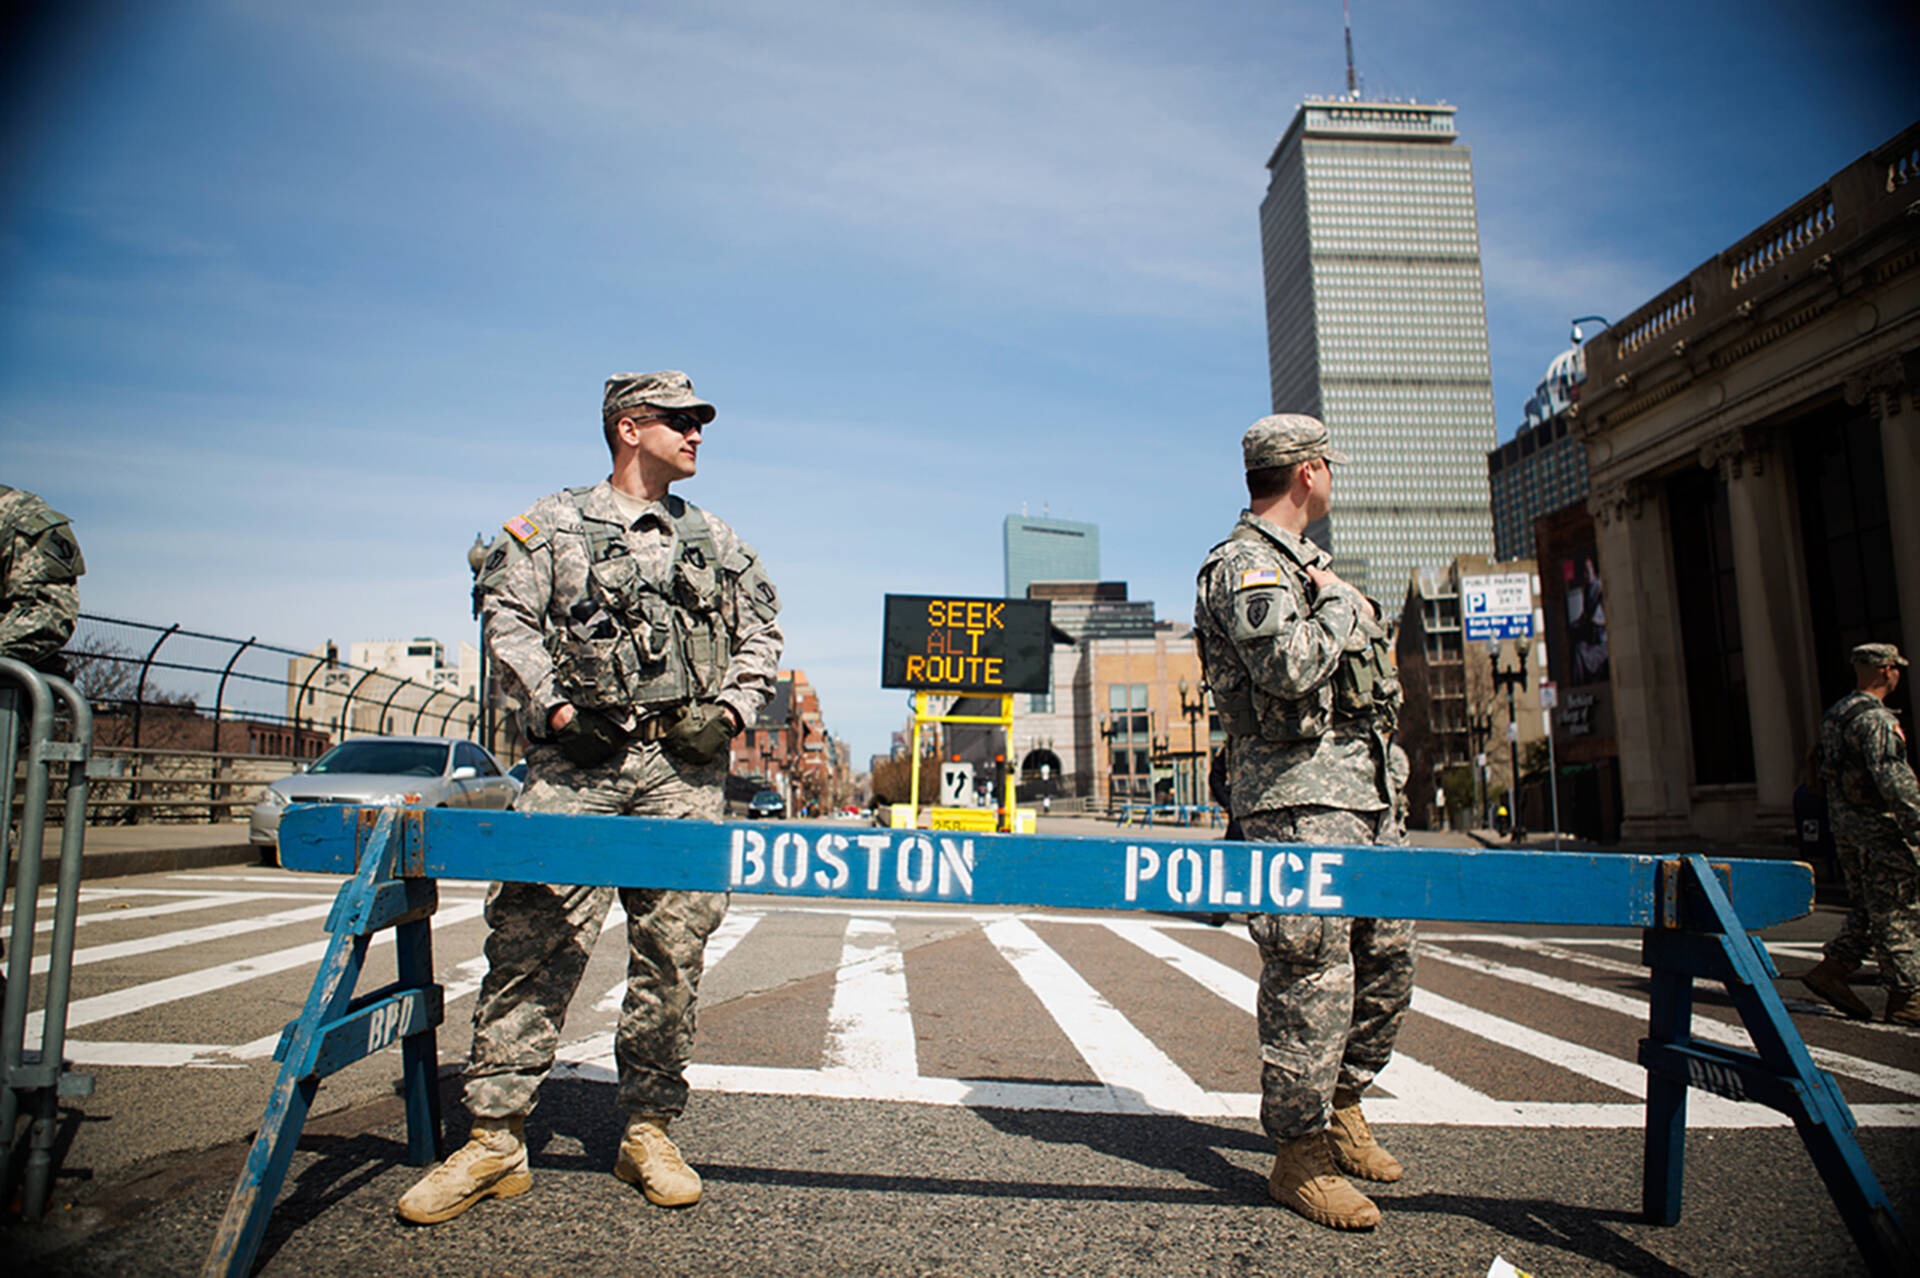 Army National Guardsmen stand at a barricade at the corner of Massachusetts Avenue and Boylston Street the day after the bombings. (Jesse Costa/WBUR)